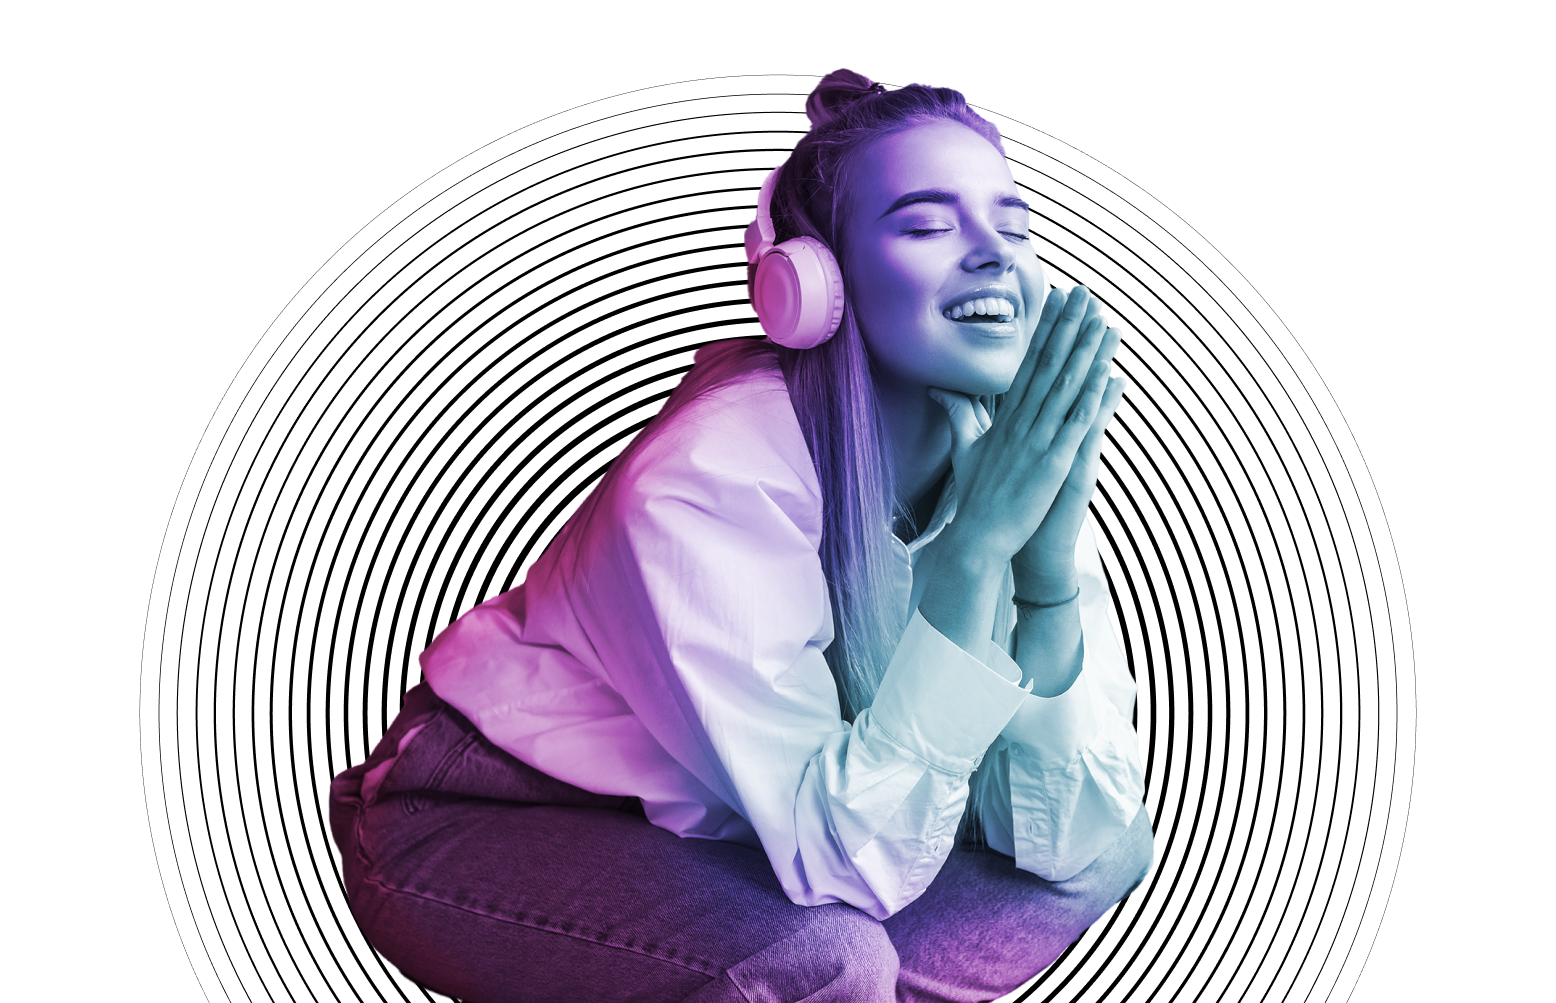 Woman smiling wearing headphones holding hands in a prayer position